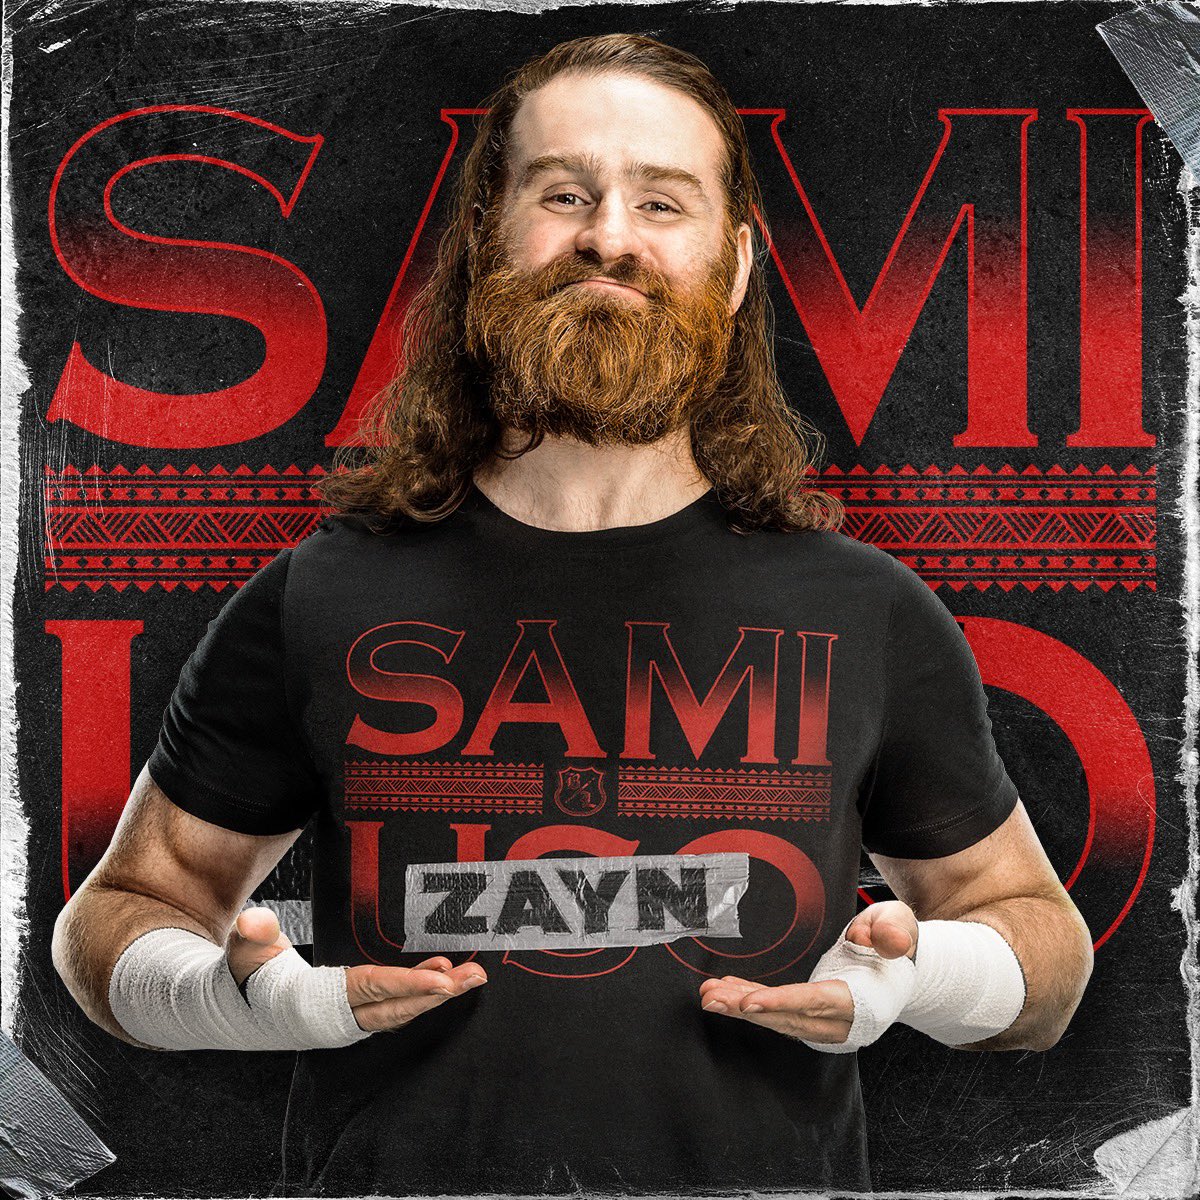 Sami Zayn strongly supports the Syrian people and their rights. 